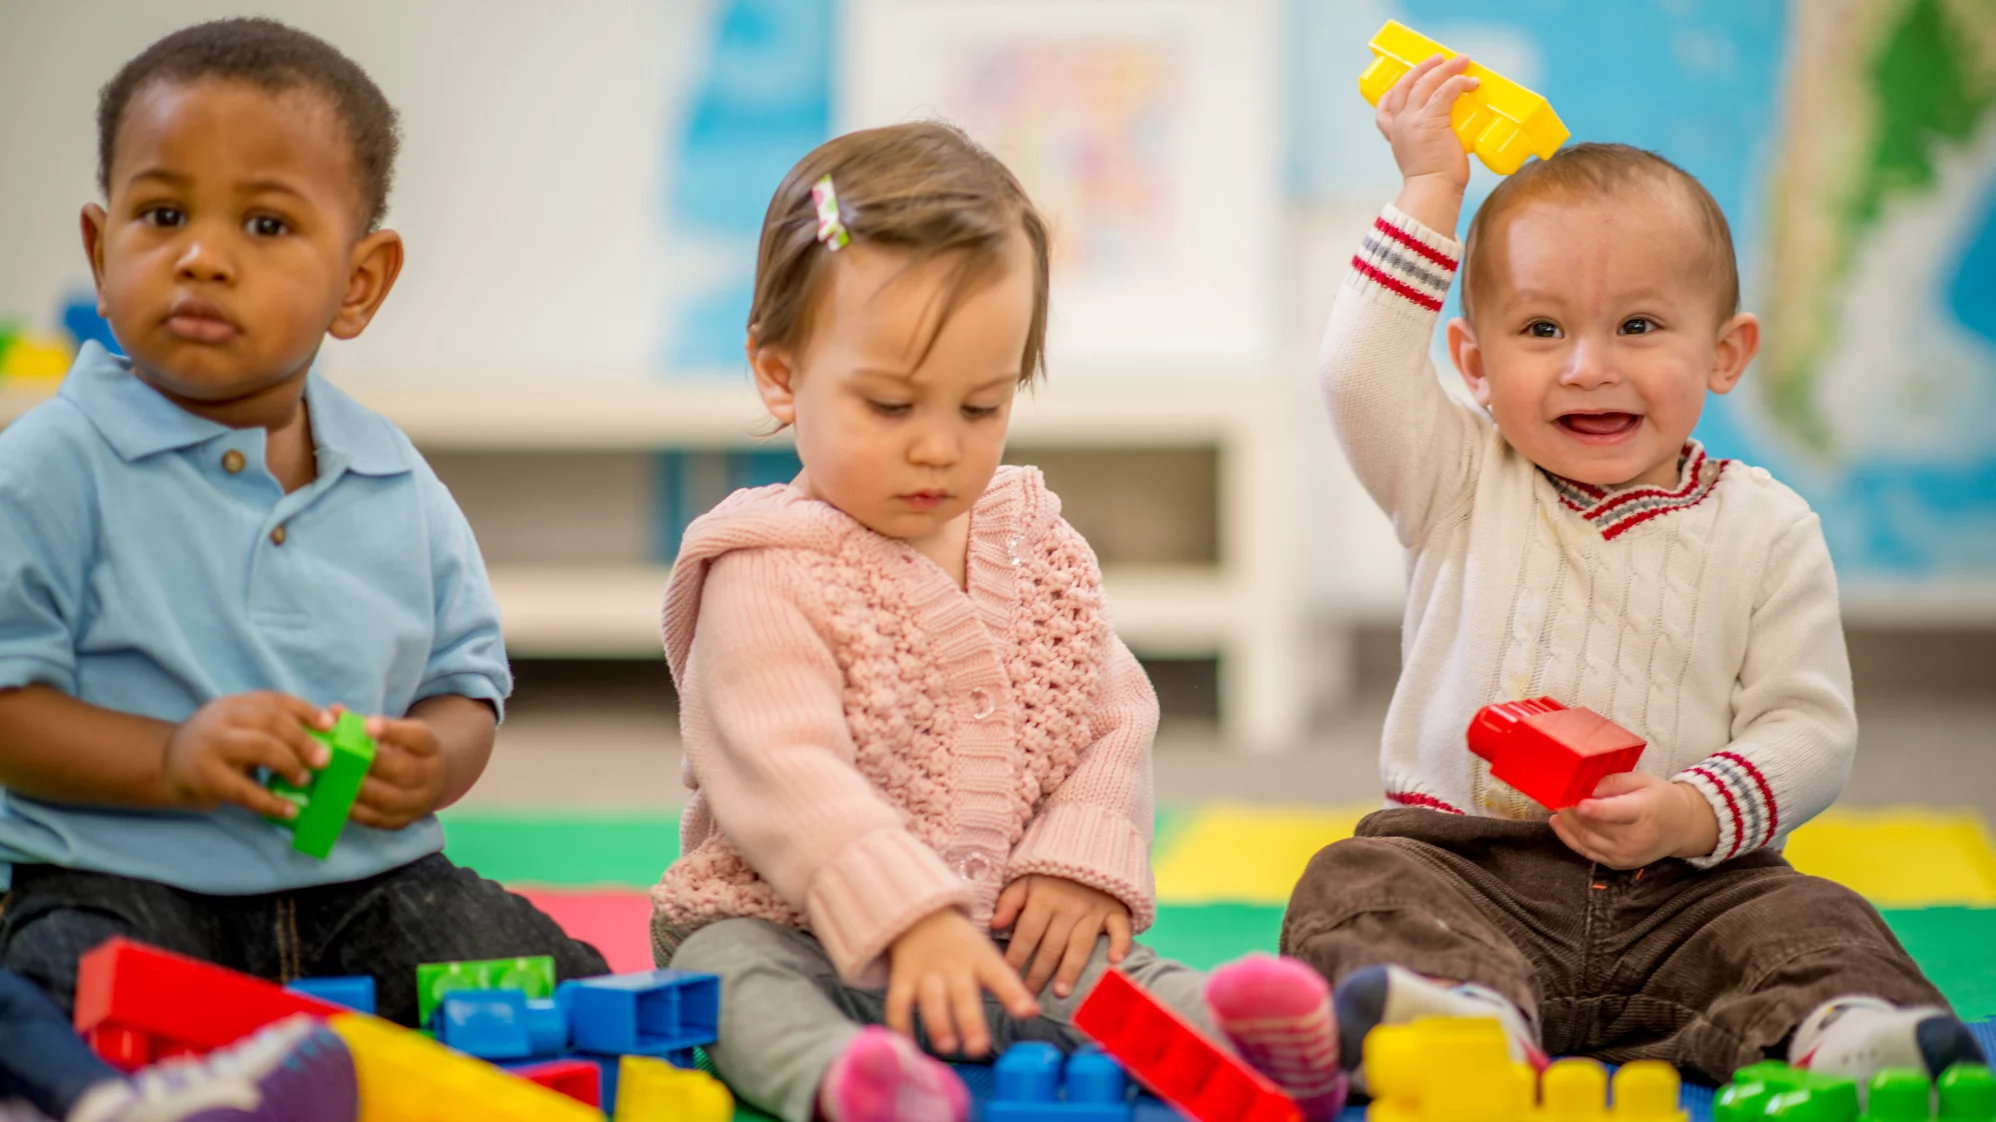 Photograph of three children playing with large lego blocks in a preschool